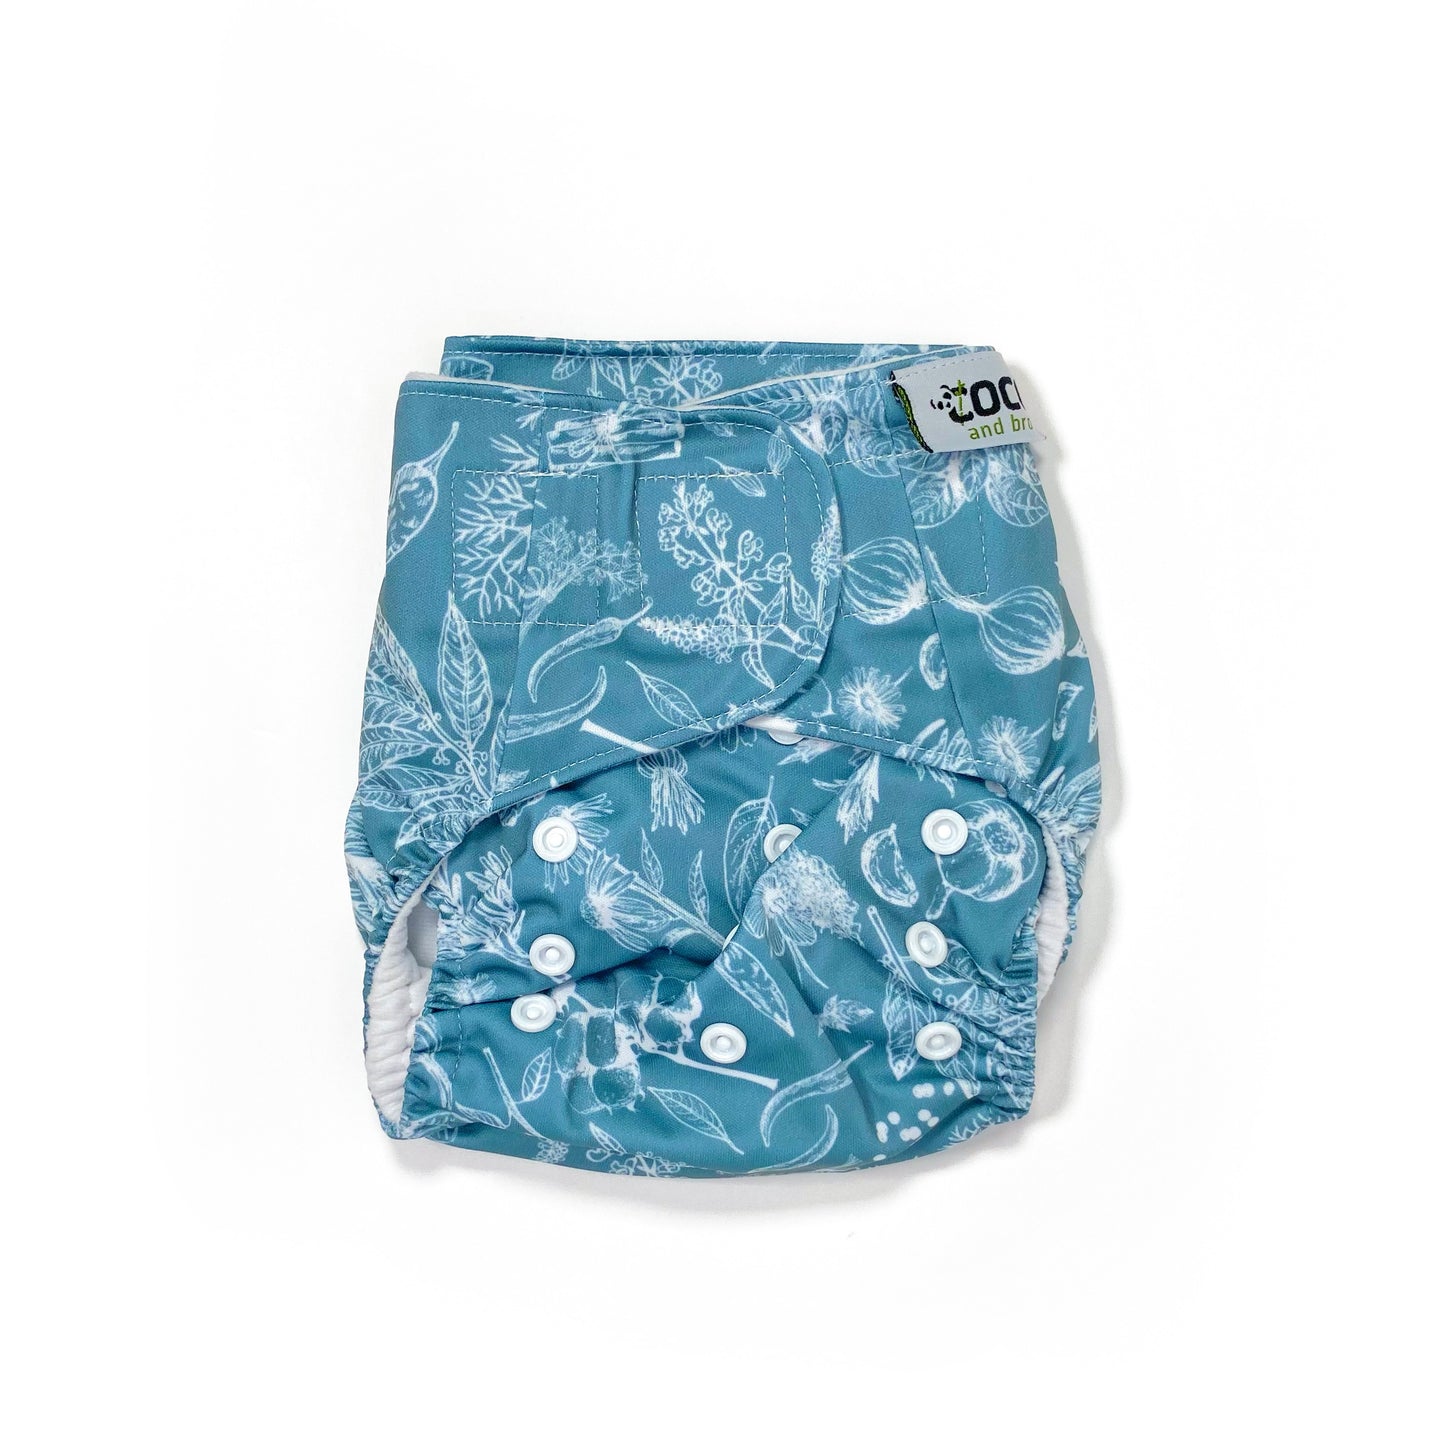 An adjustable reusable nappy for babies and toddlers, featuring a blue harvest design, with white images of various crops on a blue background.  View shows the front of the nappy, with fastenings closed.